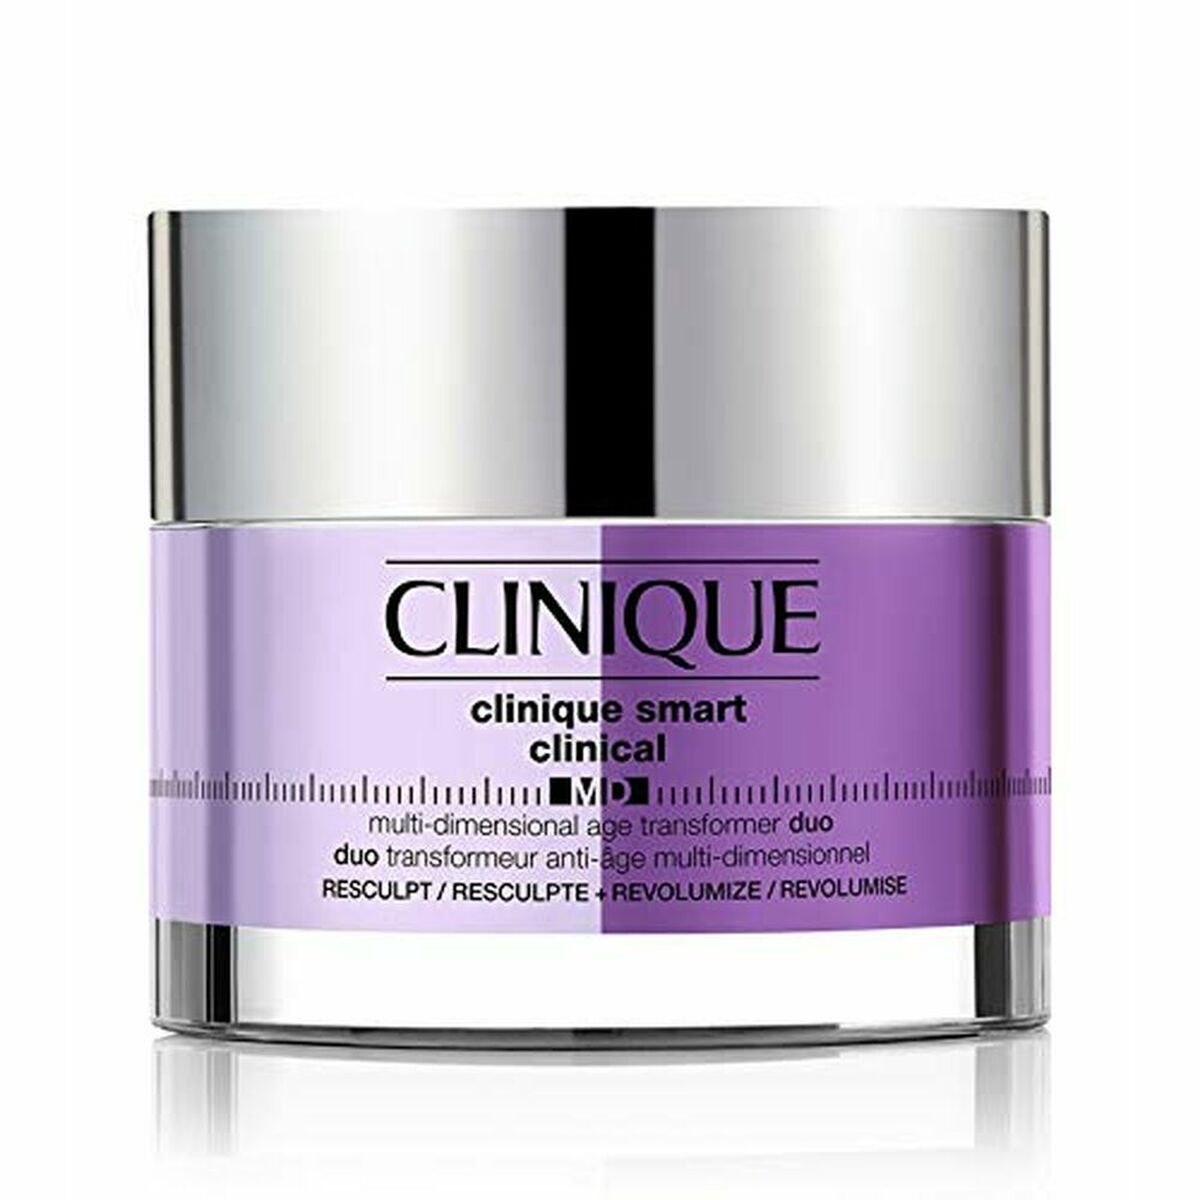 Kaufe Anti-Agingcreme Smart Clinical MD Duo Clinique 50 ml bei AWK Flagship um € 76.00